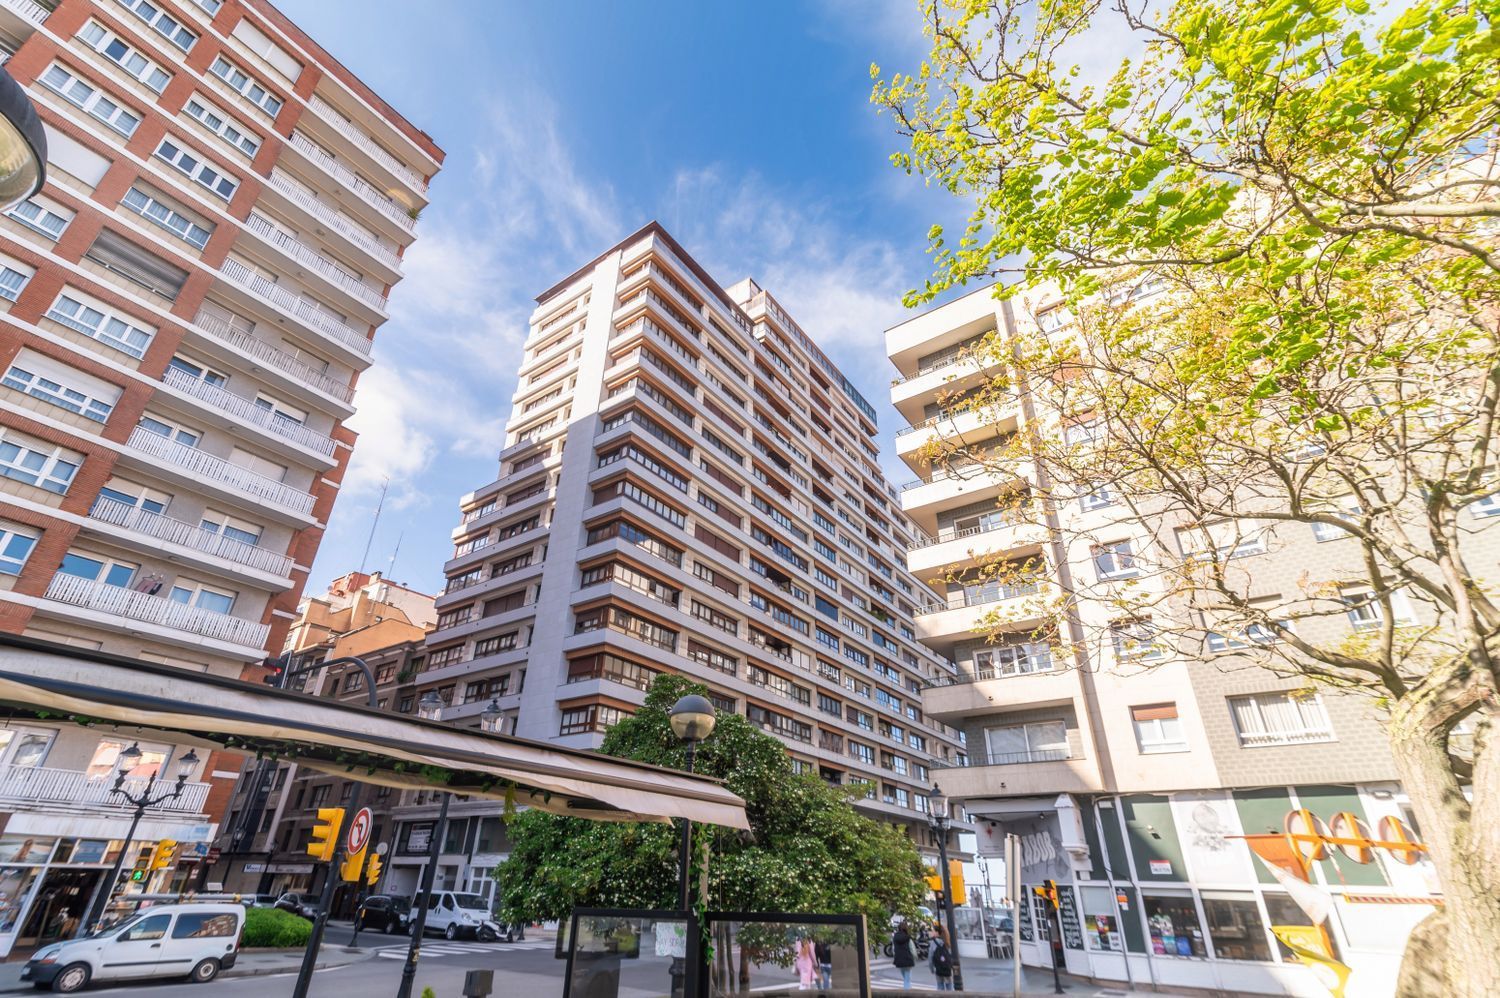 Apartment for sale on the seafront on Calle Menéndez Pelayo, in Gijón